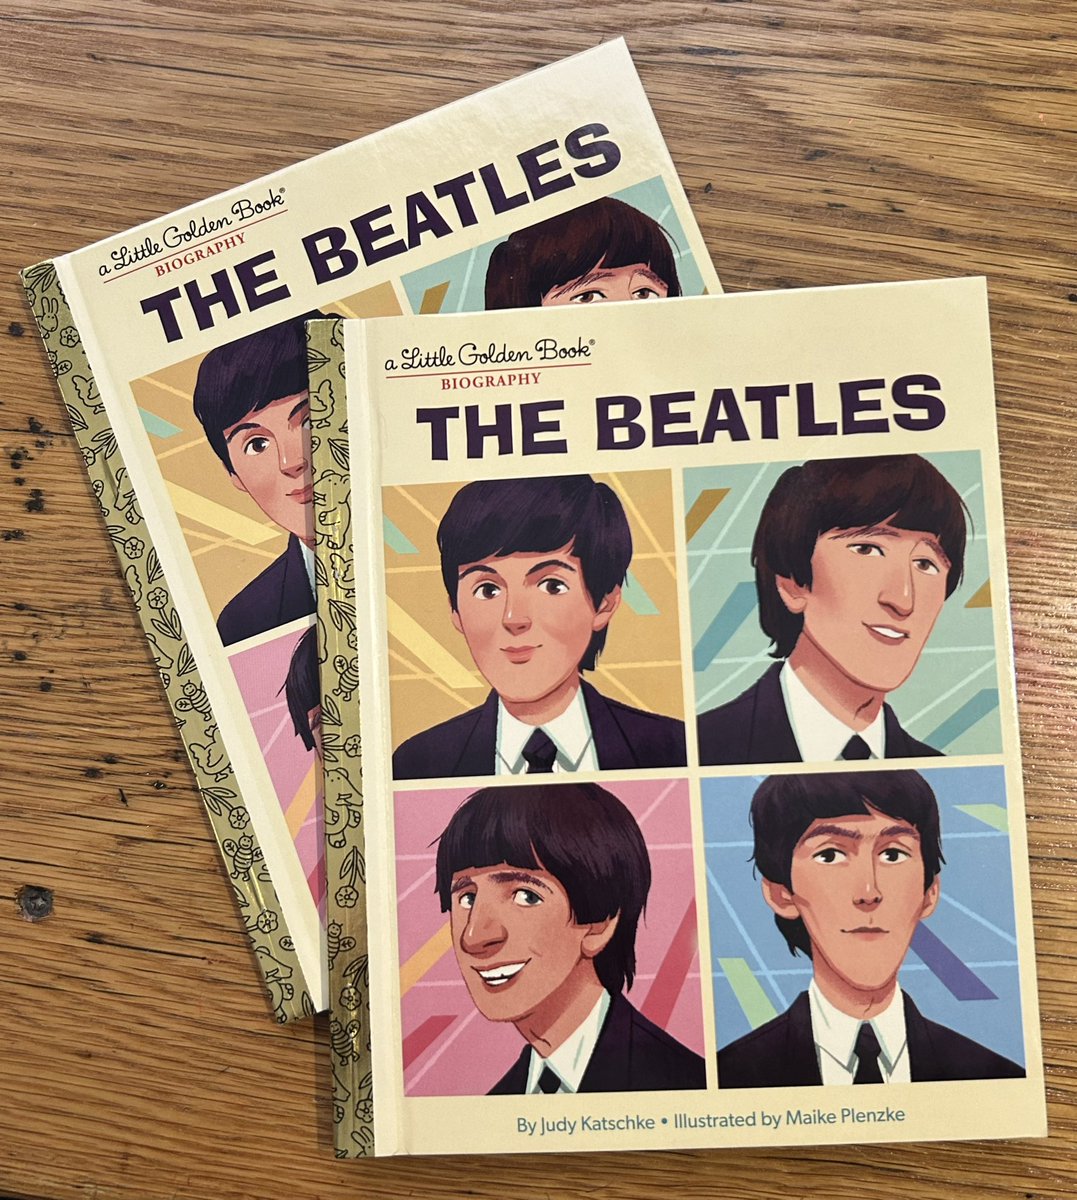 Add the Fab Four to my #LittleGoldenBook collection. Released today. #TheBeatles